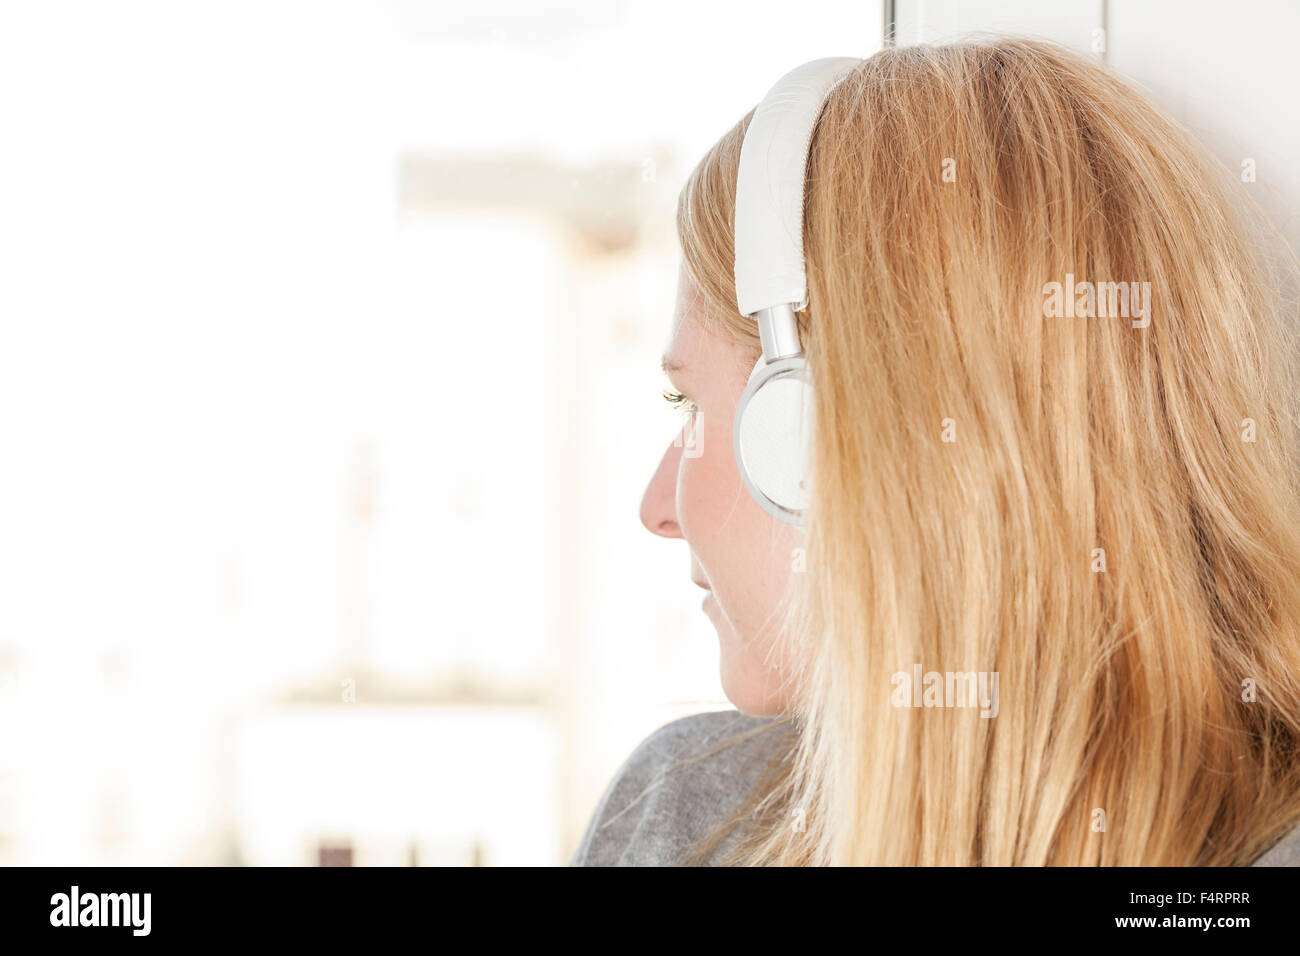 blond woman on window sill with headphones Stock Photo